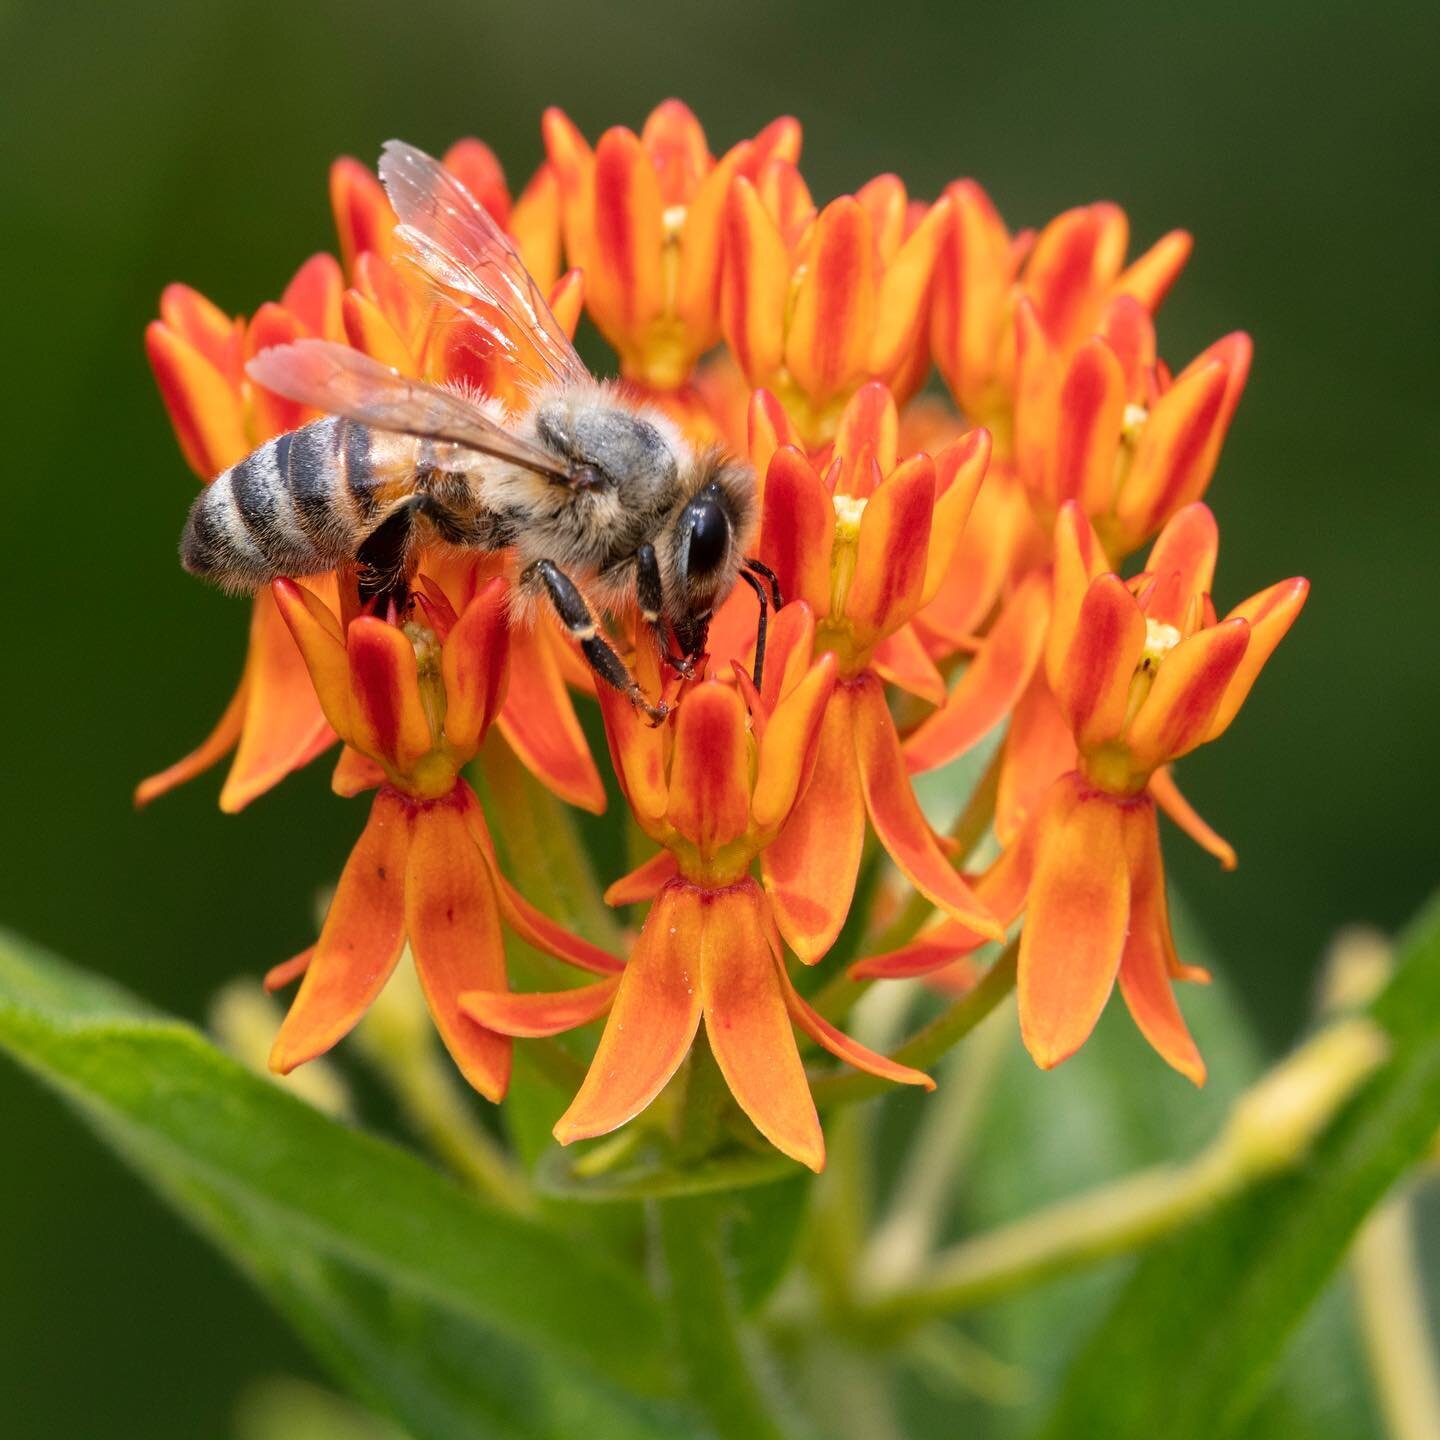 🐝🧡Bees love butterfly weed🐝🧡

Not sure why we call this bee-utiful plant a weed! Asclepias tuberous is a pollinator favorite &amp; nice plant for gardens. It&rsquo;s native throughout many areas in North America, especially common in prairies and